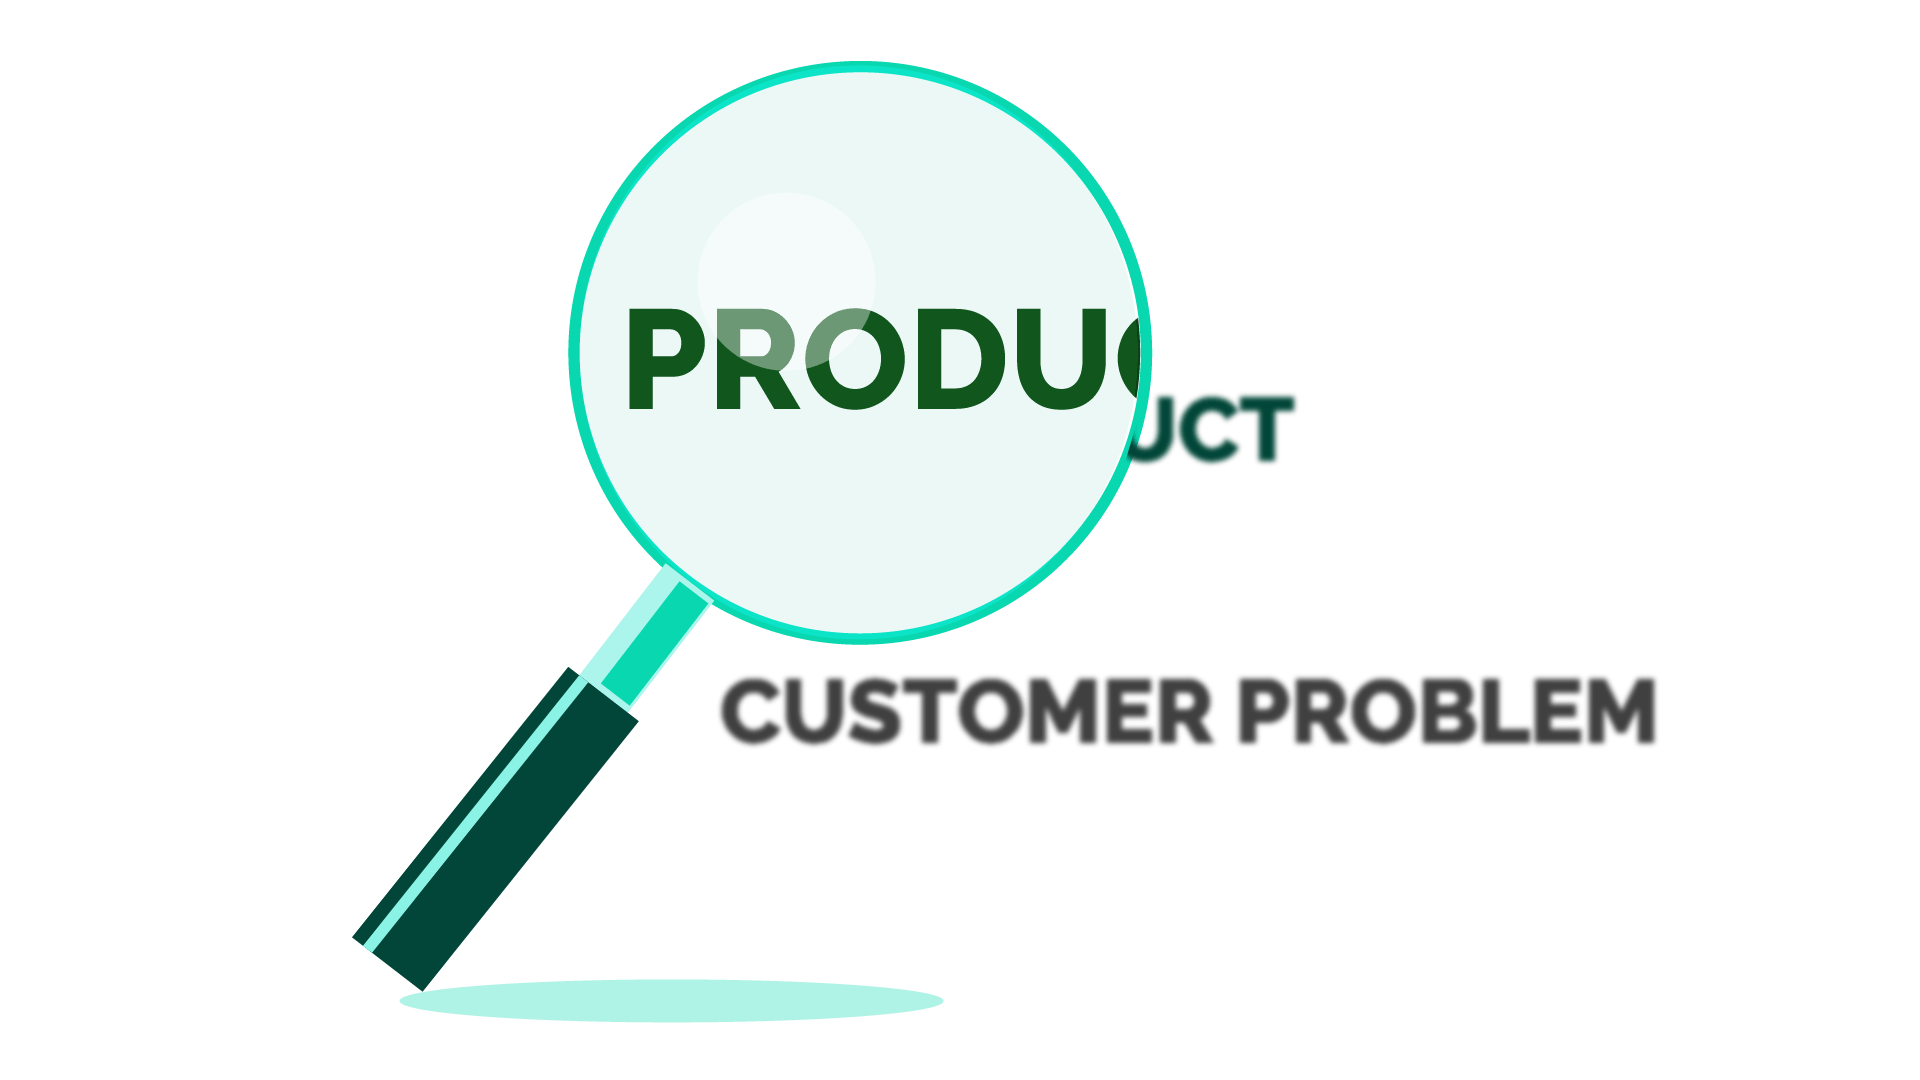 Focusing on the product, not the customer